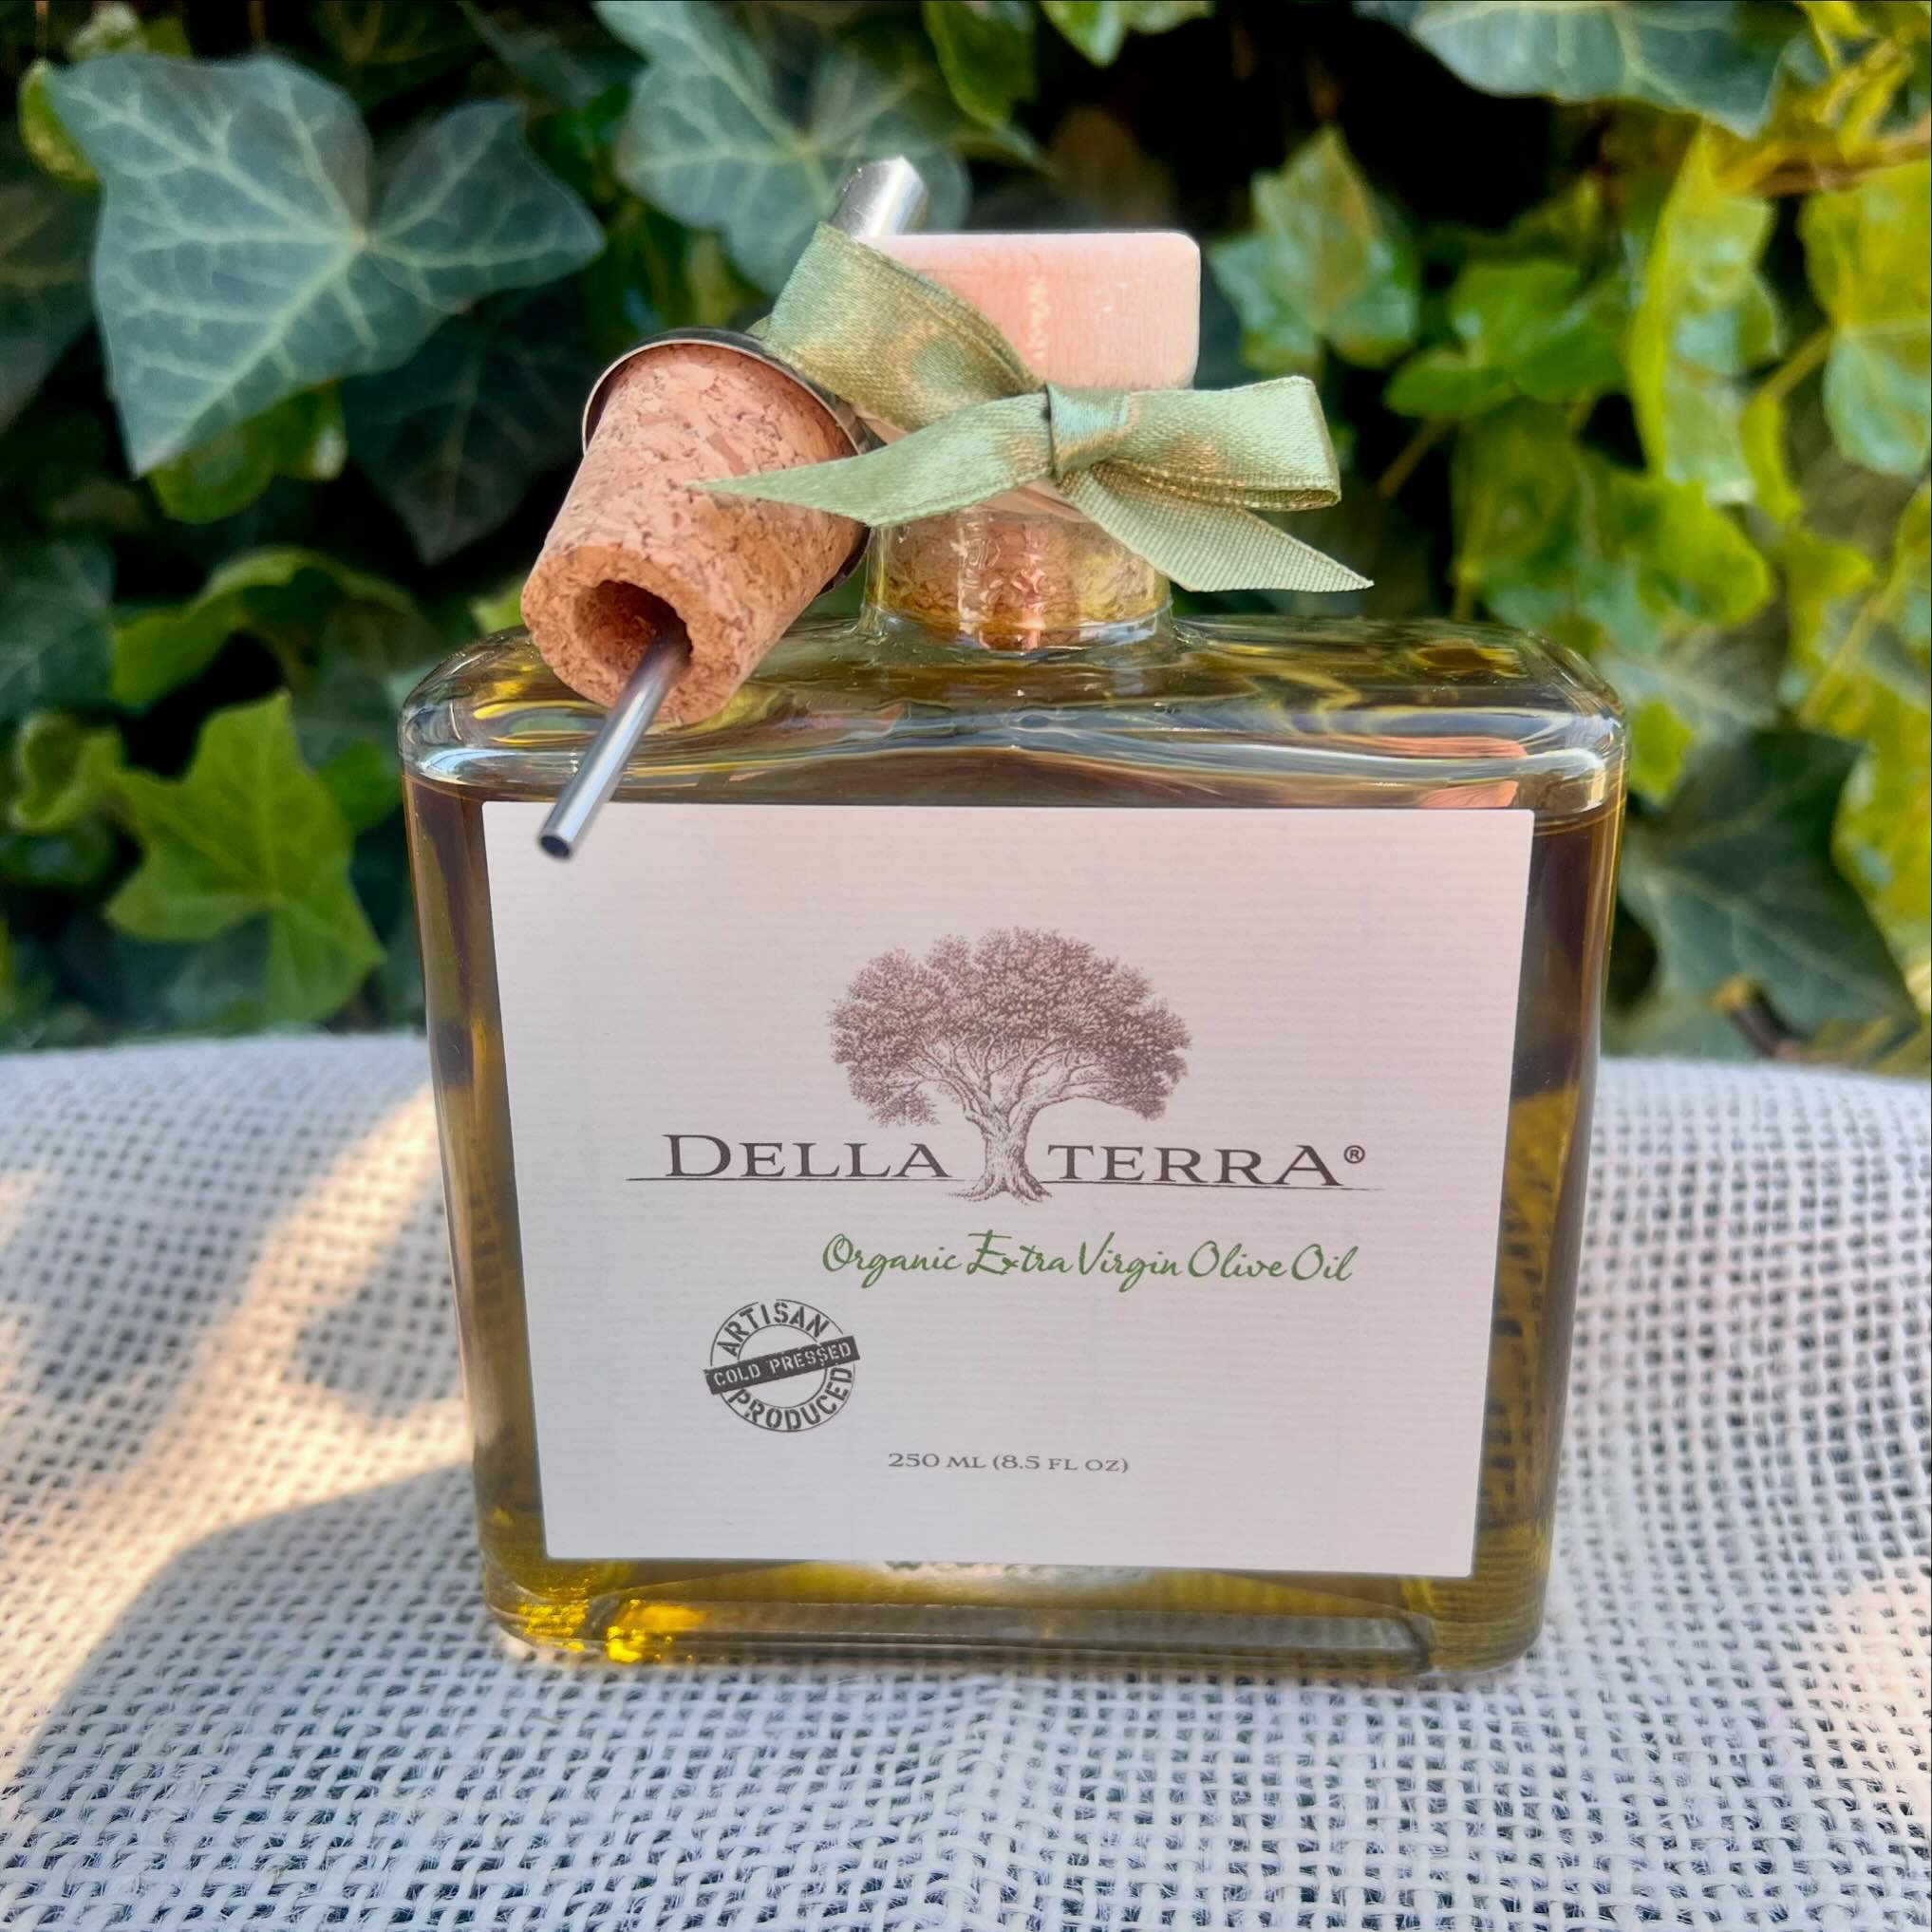 🫒 Sometimes I reach out to our neighbors in California and Washington and bend my &ldquo;Oregon made only&rdquo; rules because a product is just too good. Look at this gorgeous bottle of organic Extra Virgin Olive Oil from Woman Owned Della Terra Oi